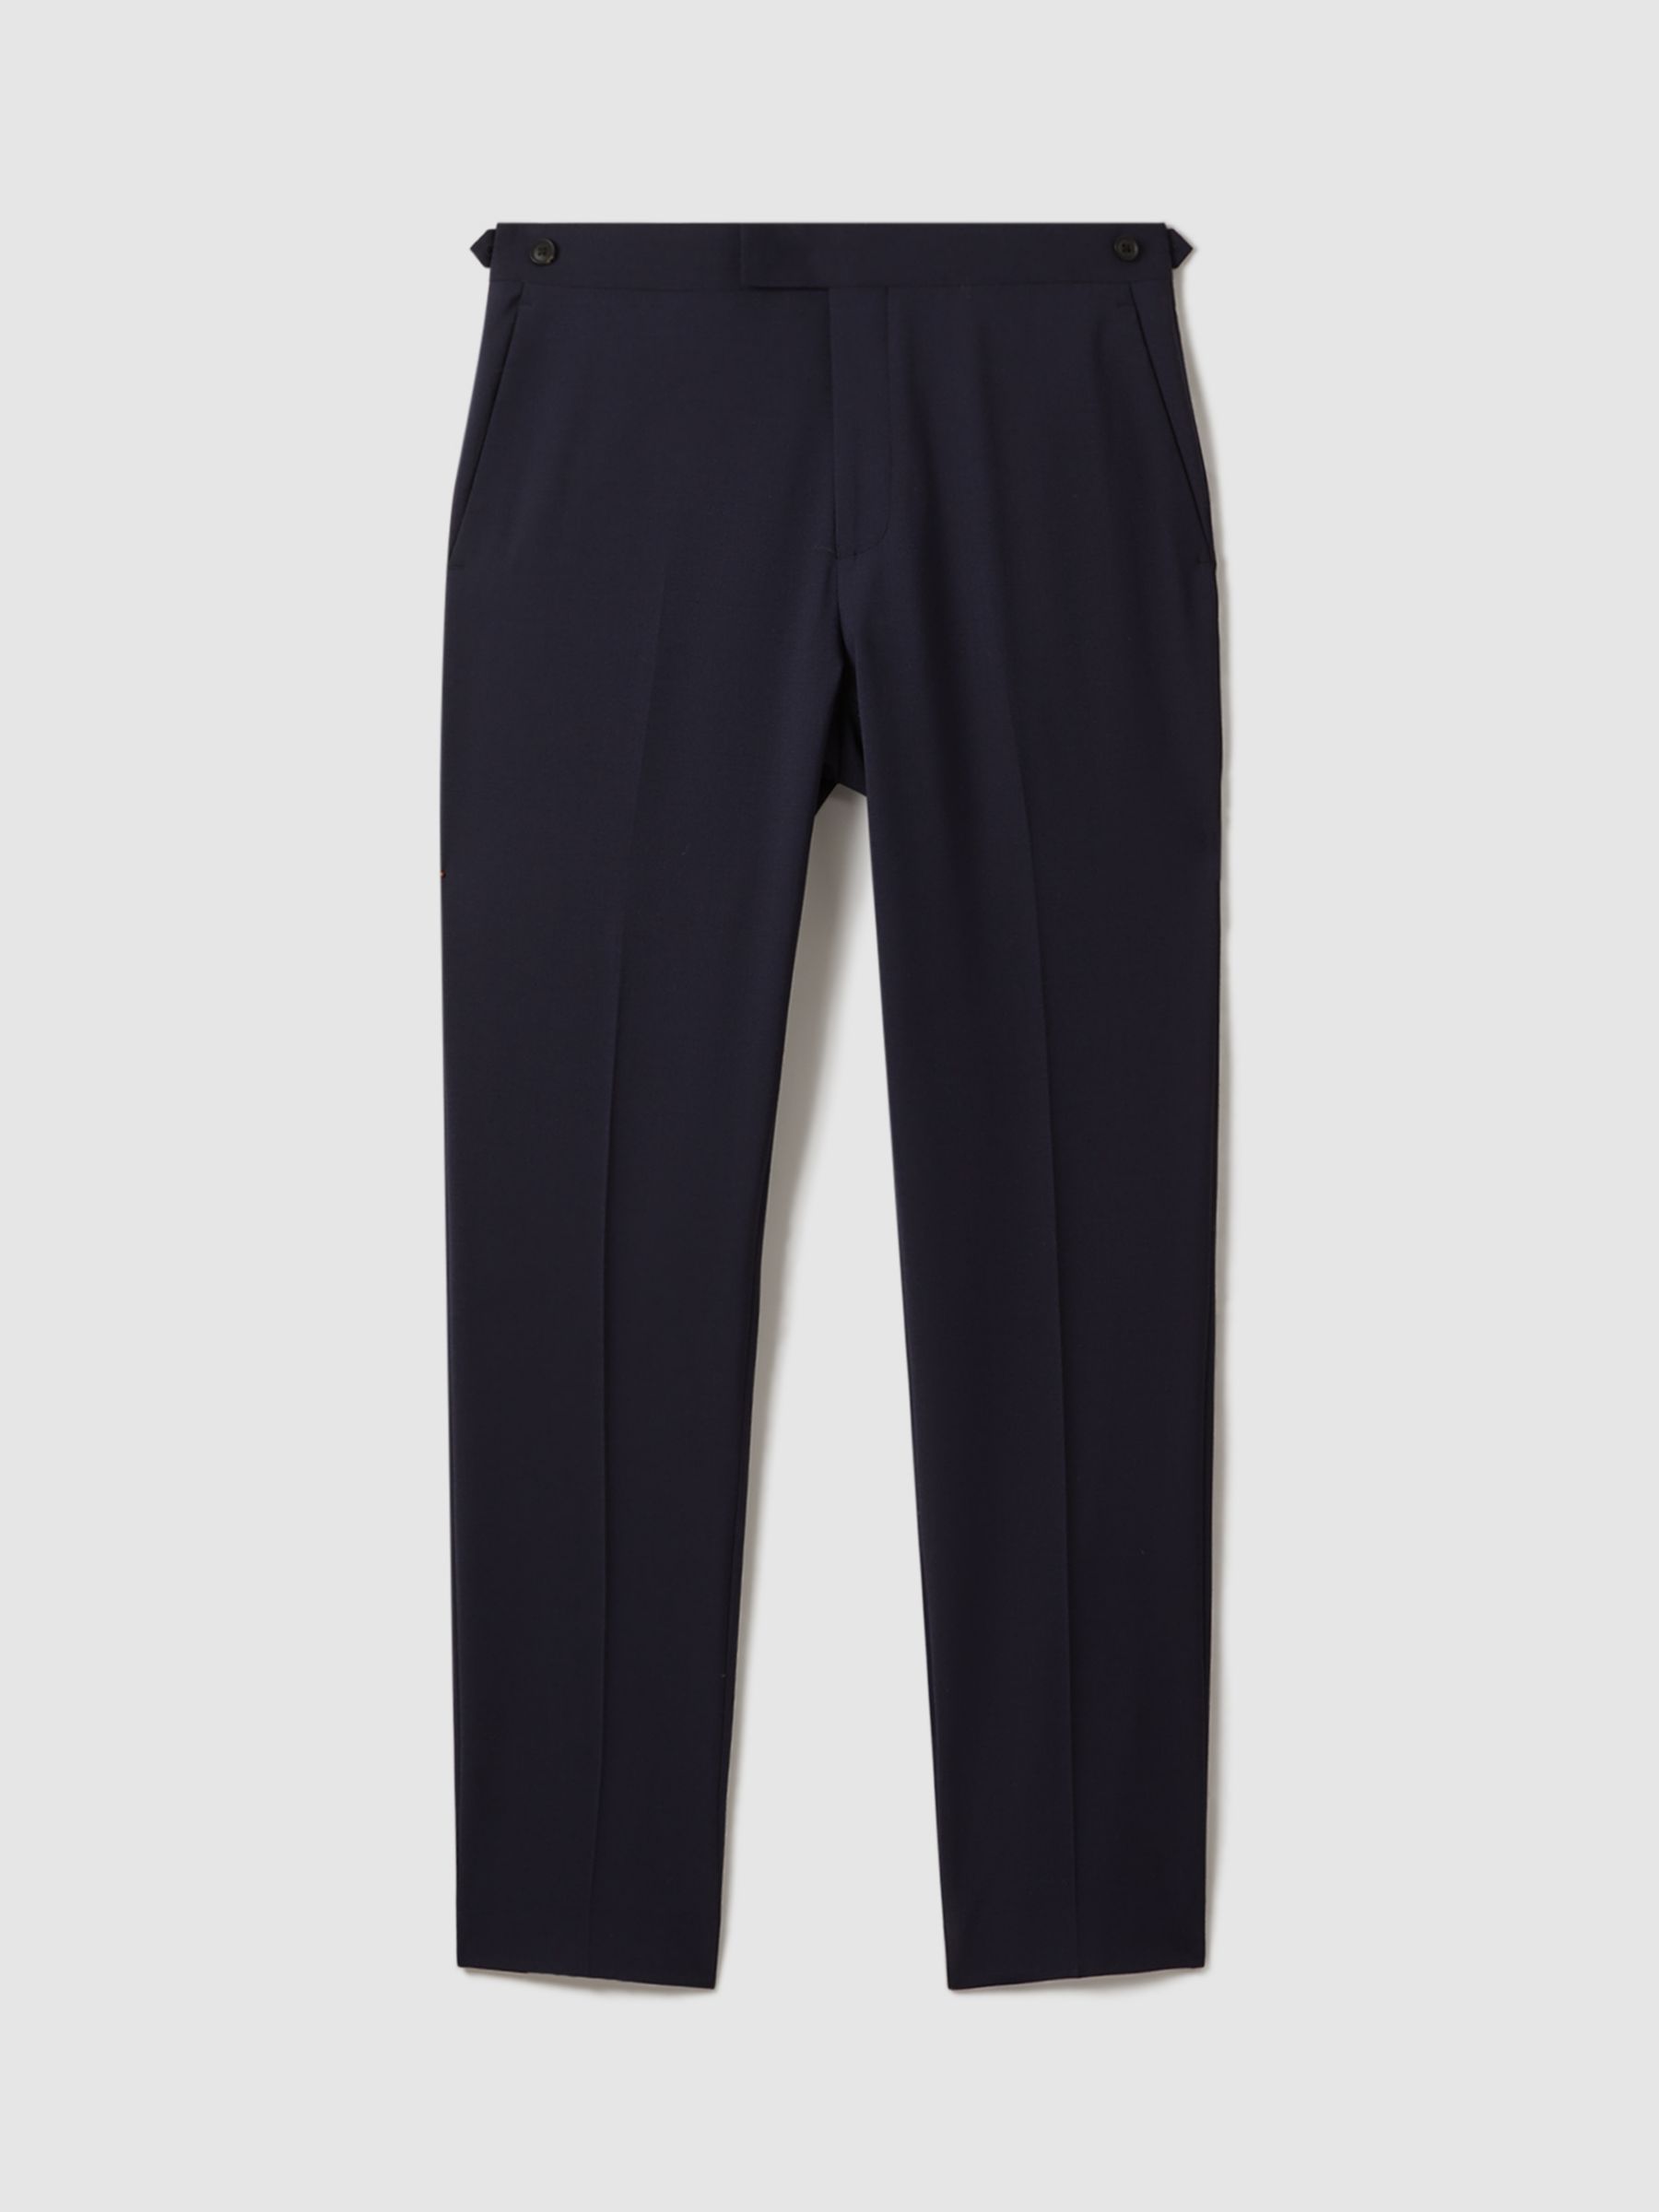 Reiss Hope Modern Fit Travel Trousers, Navy, 34R